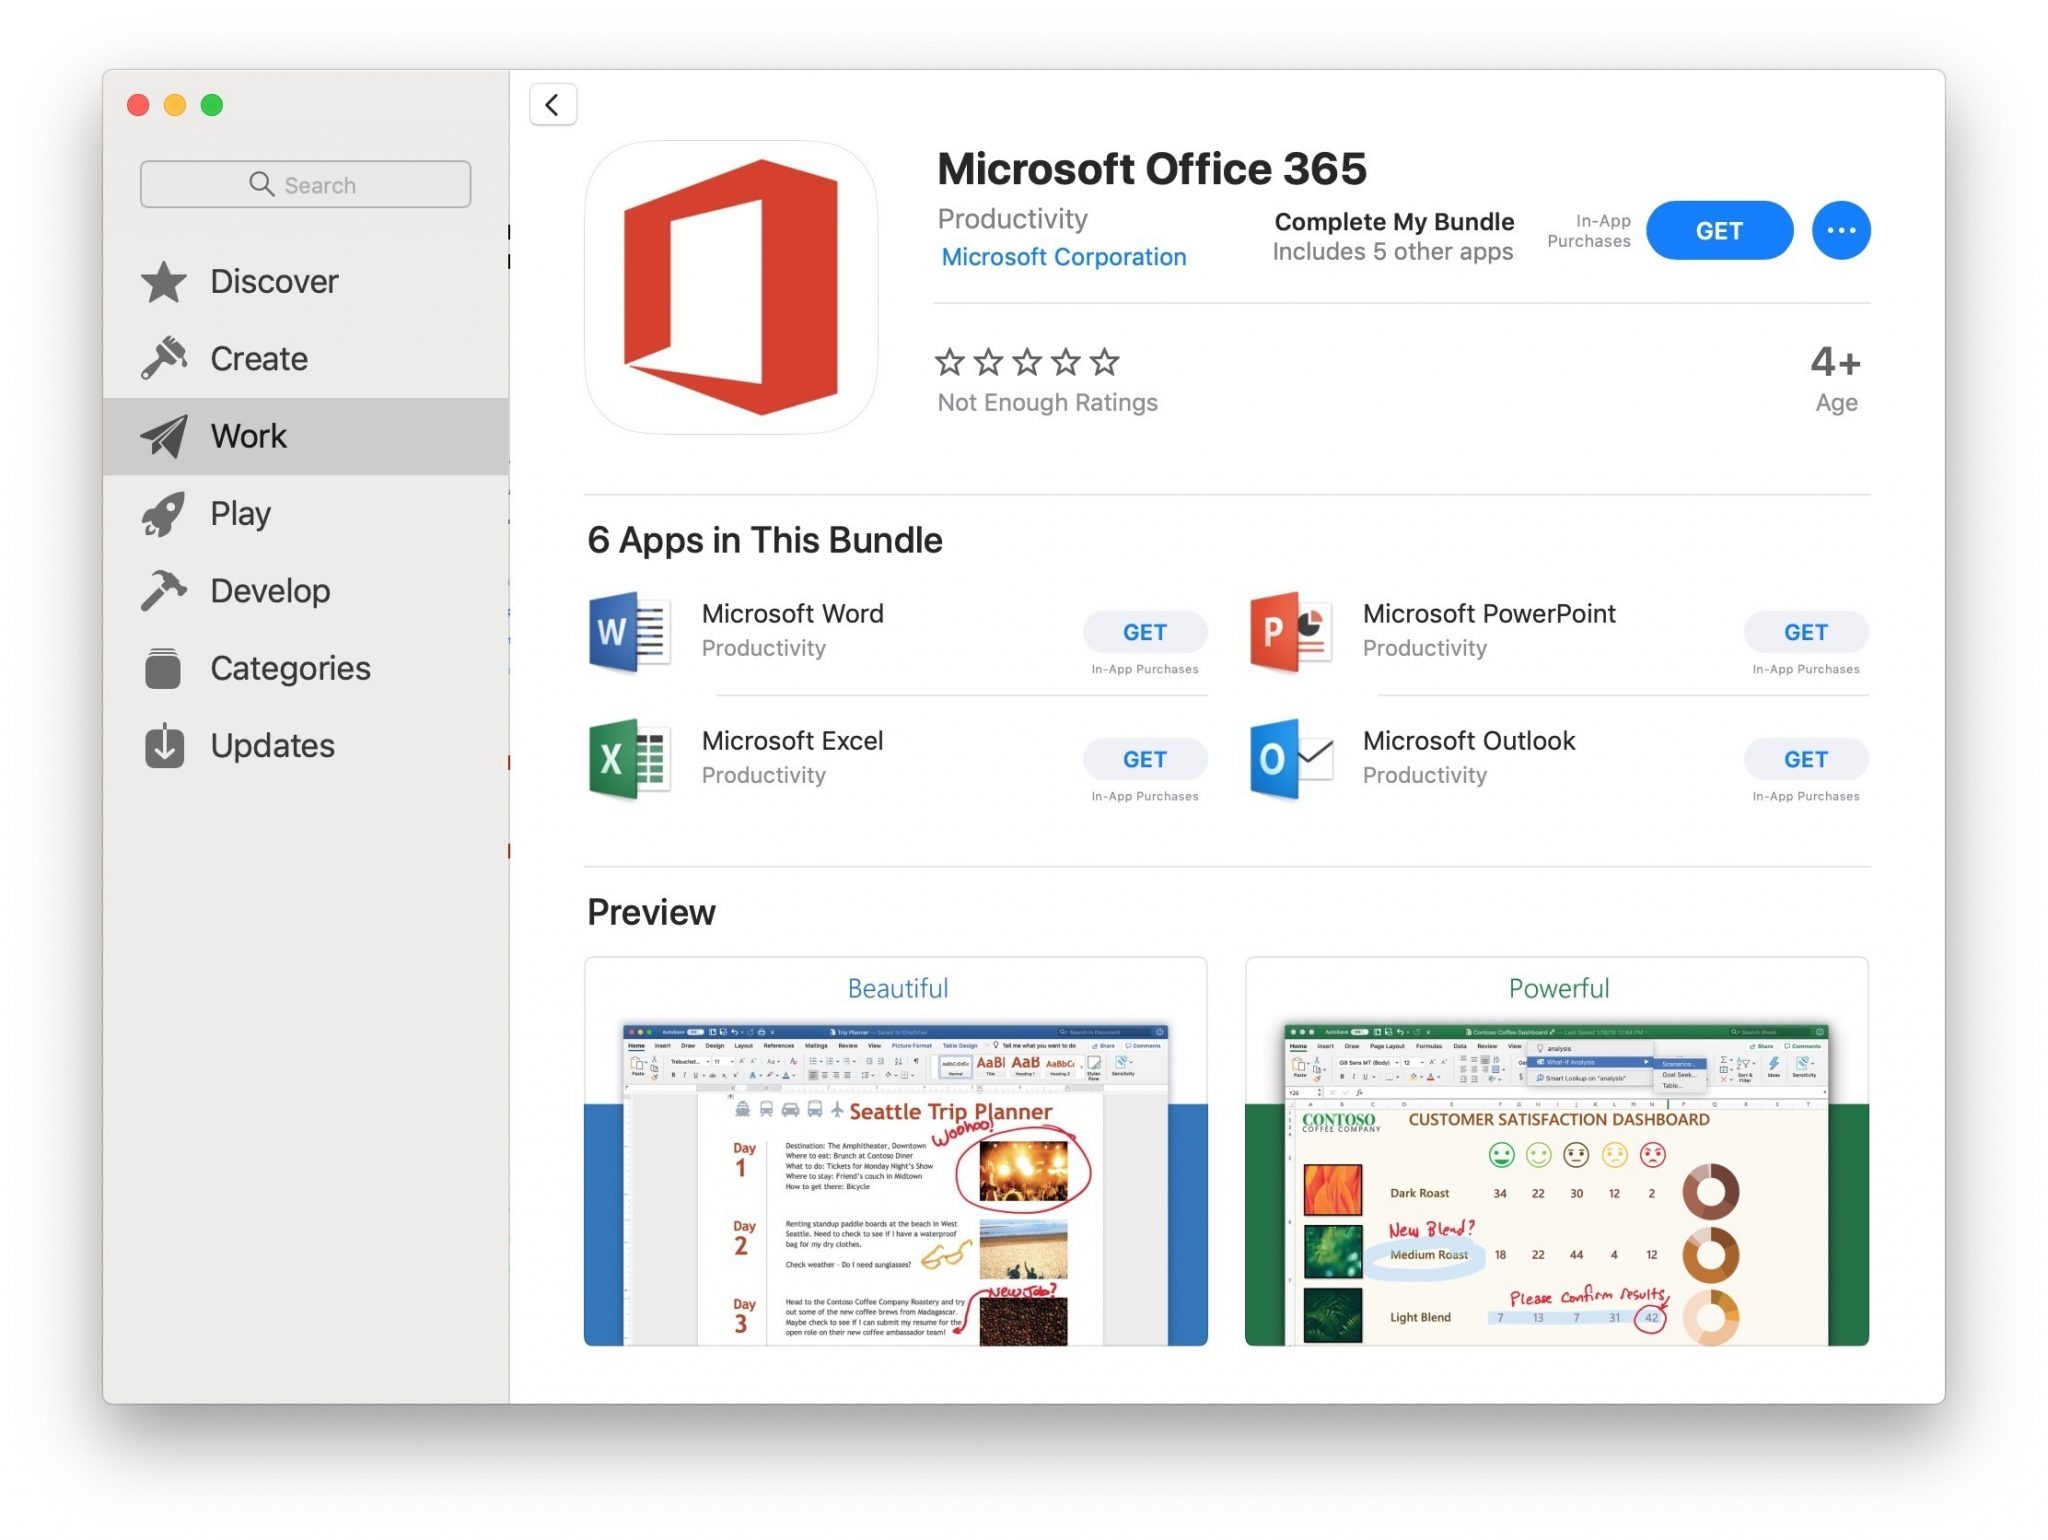 Office 365 for Mac is available on the Mac App Store